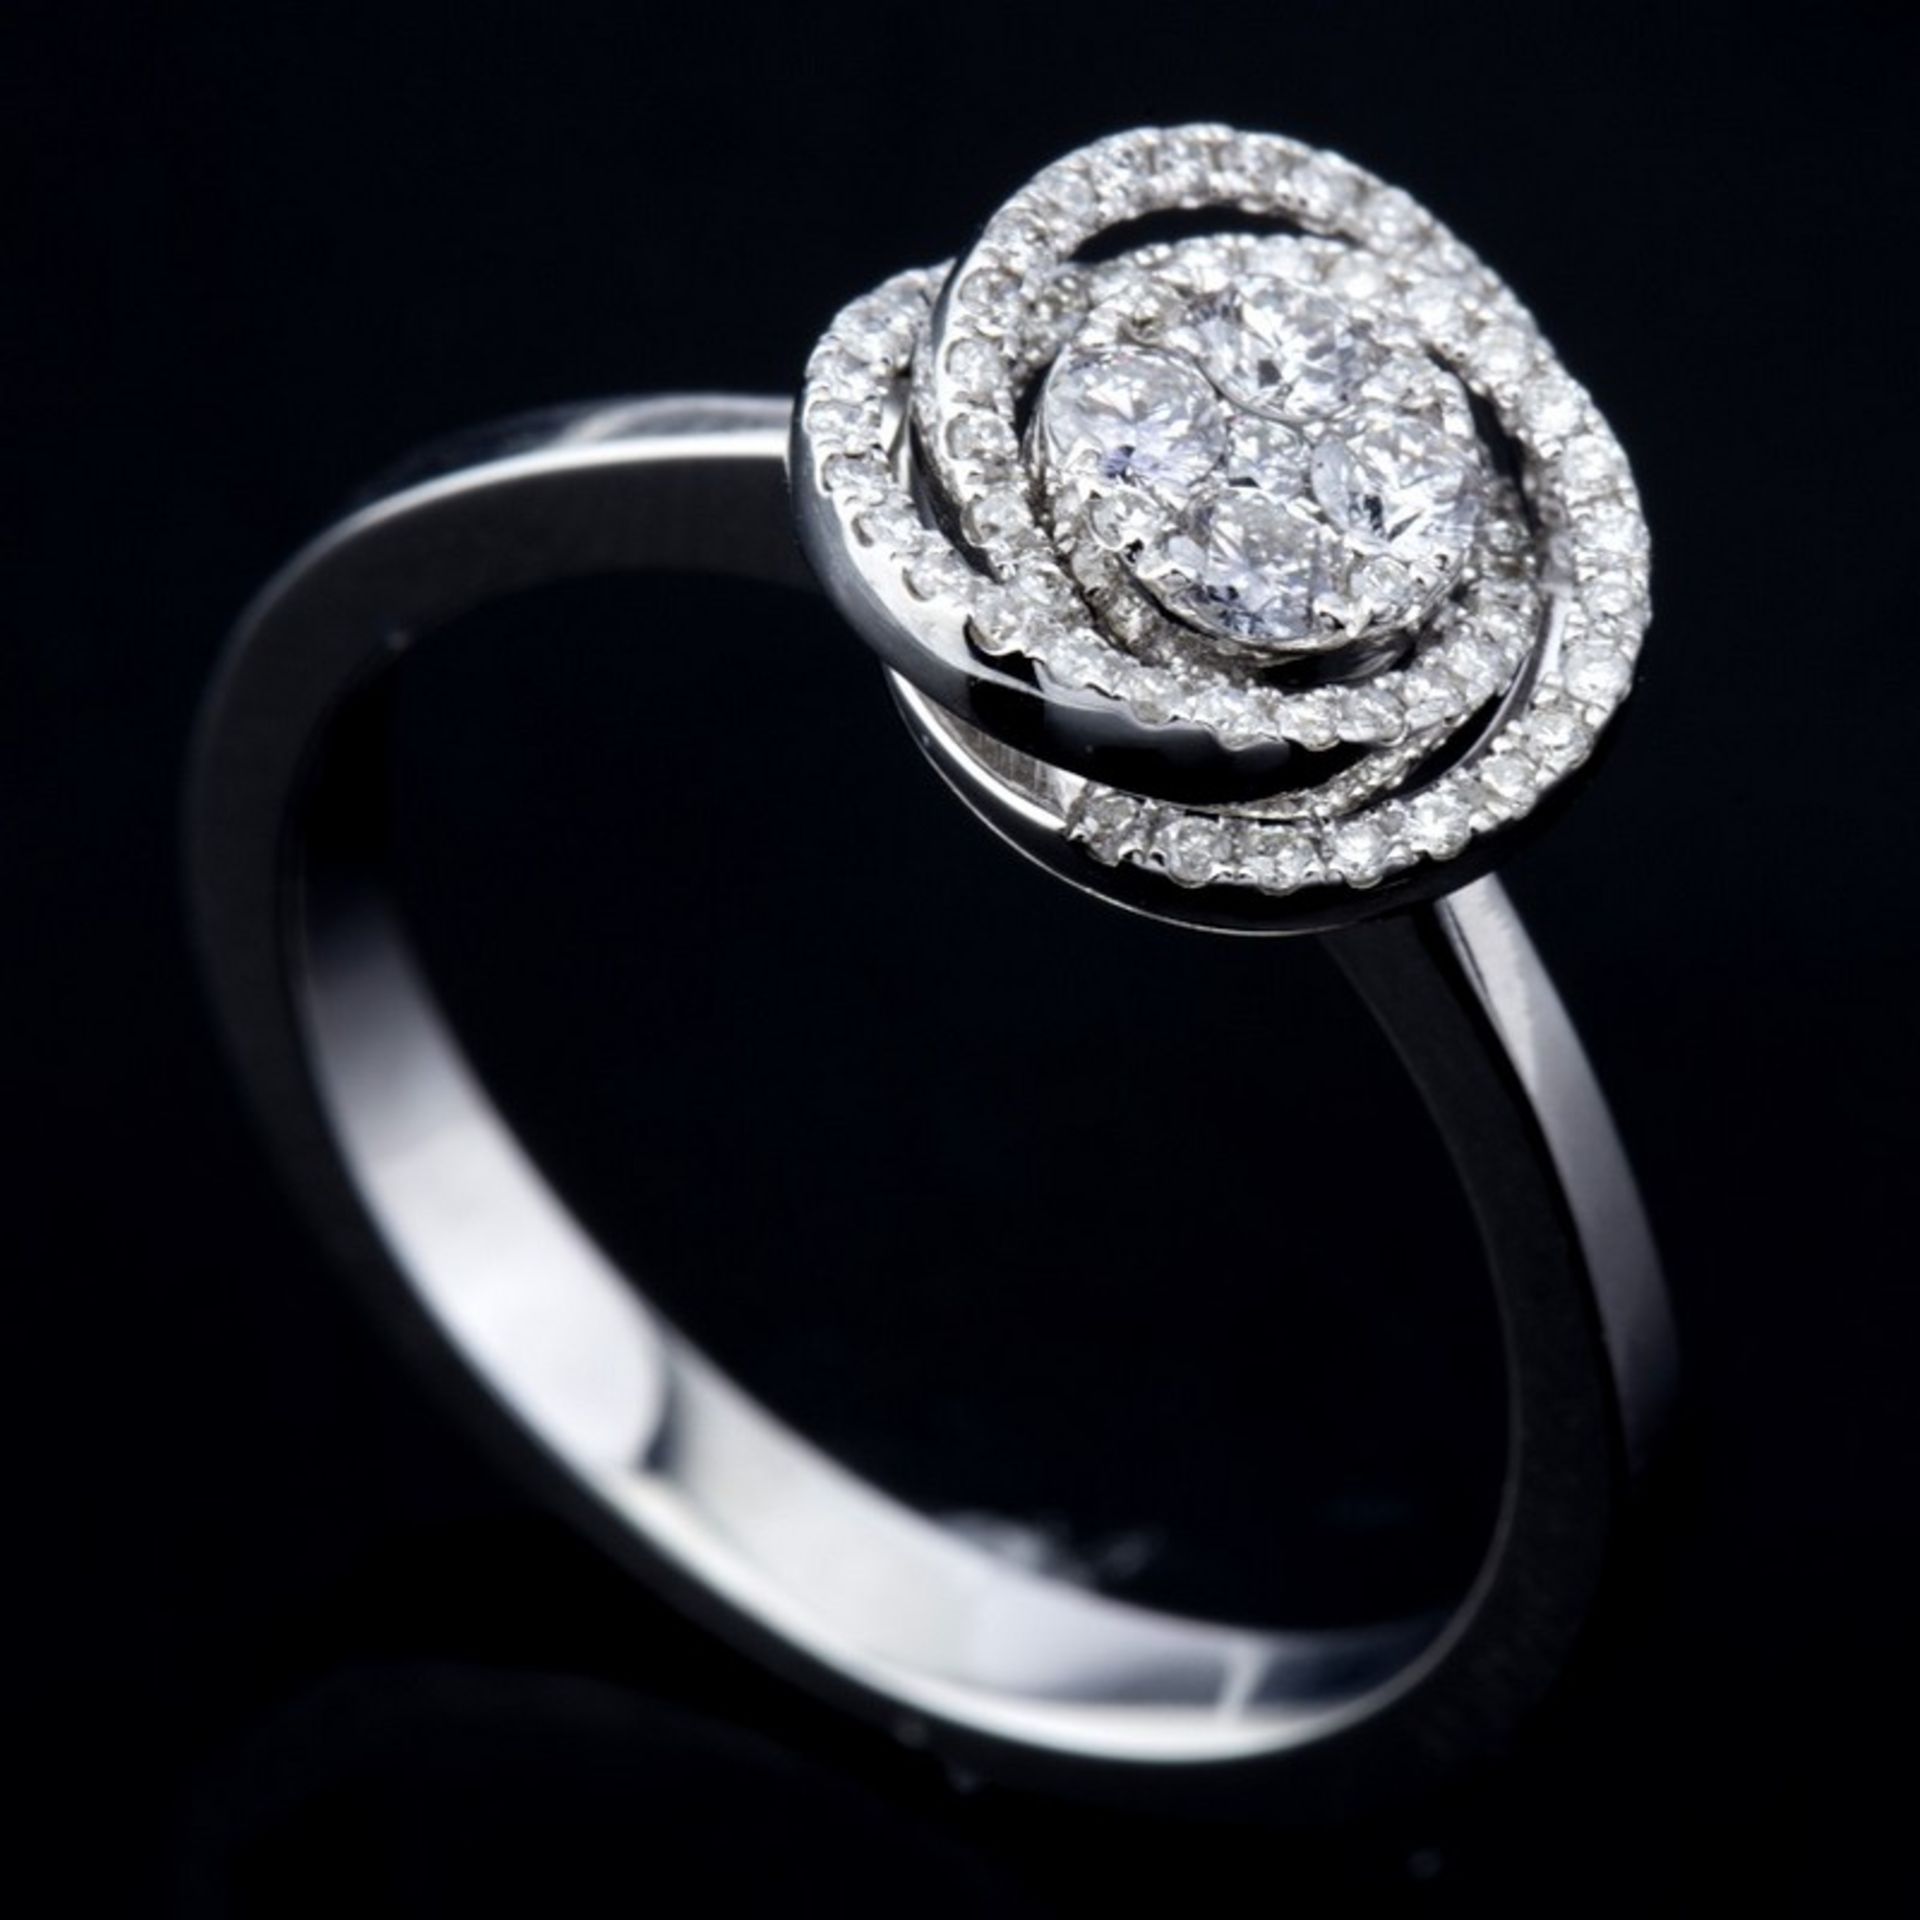 Certificated 14K White Gold Diamond Ring - Image 4 of 7